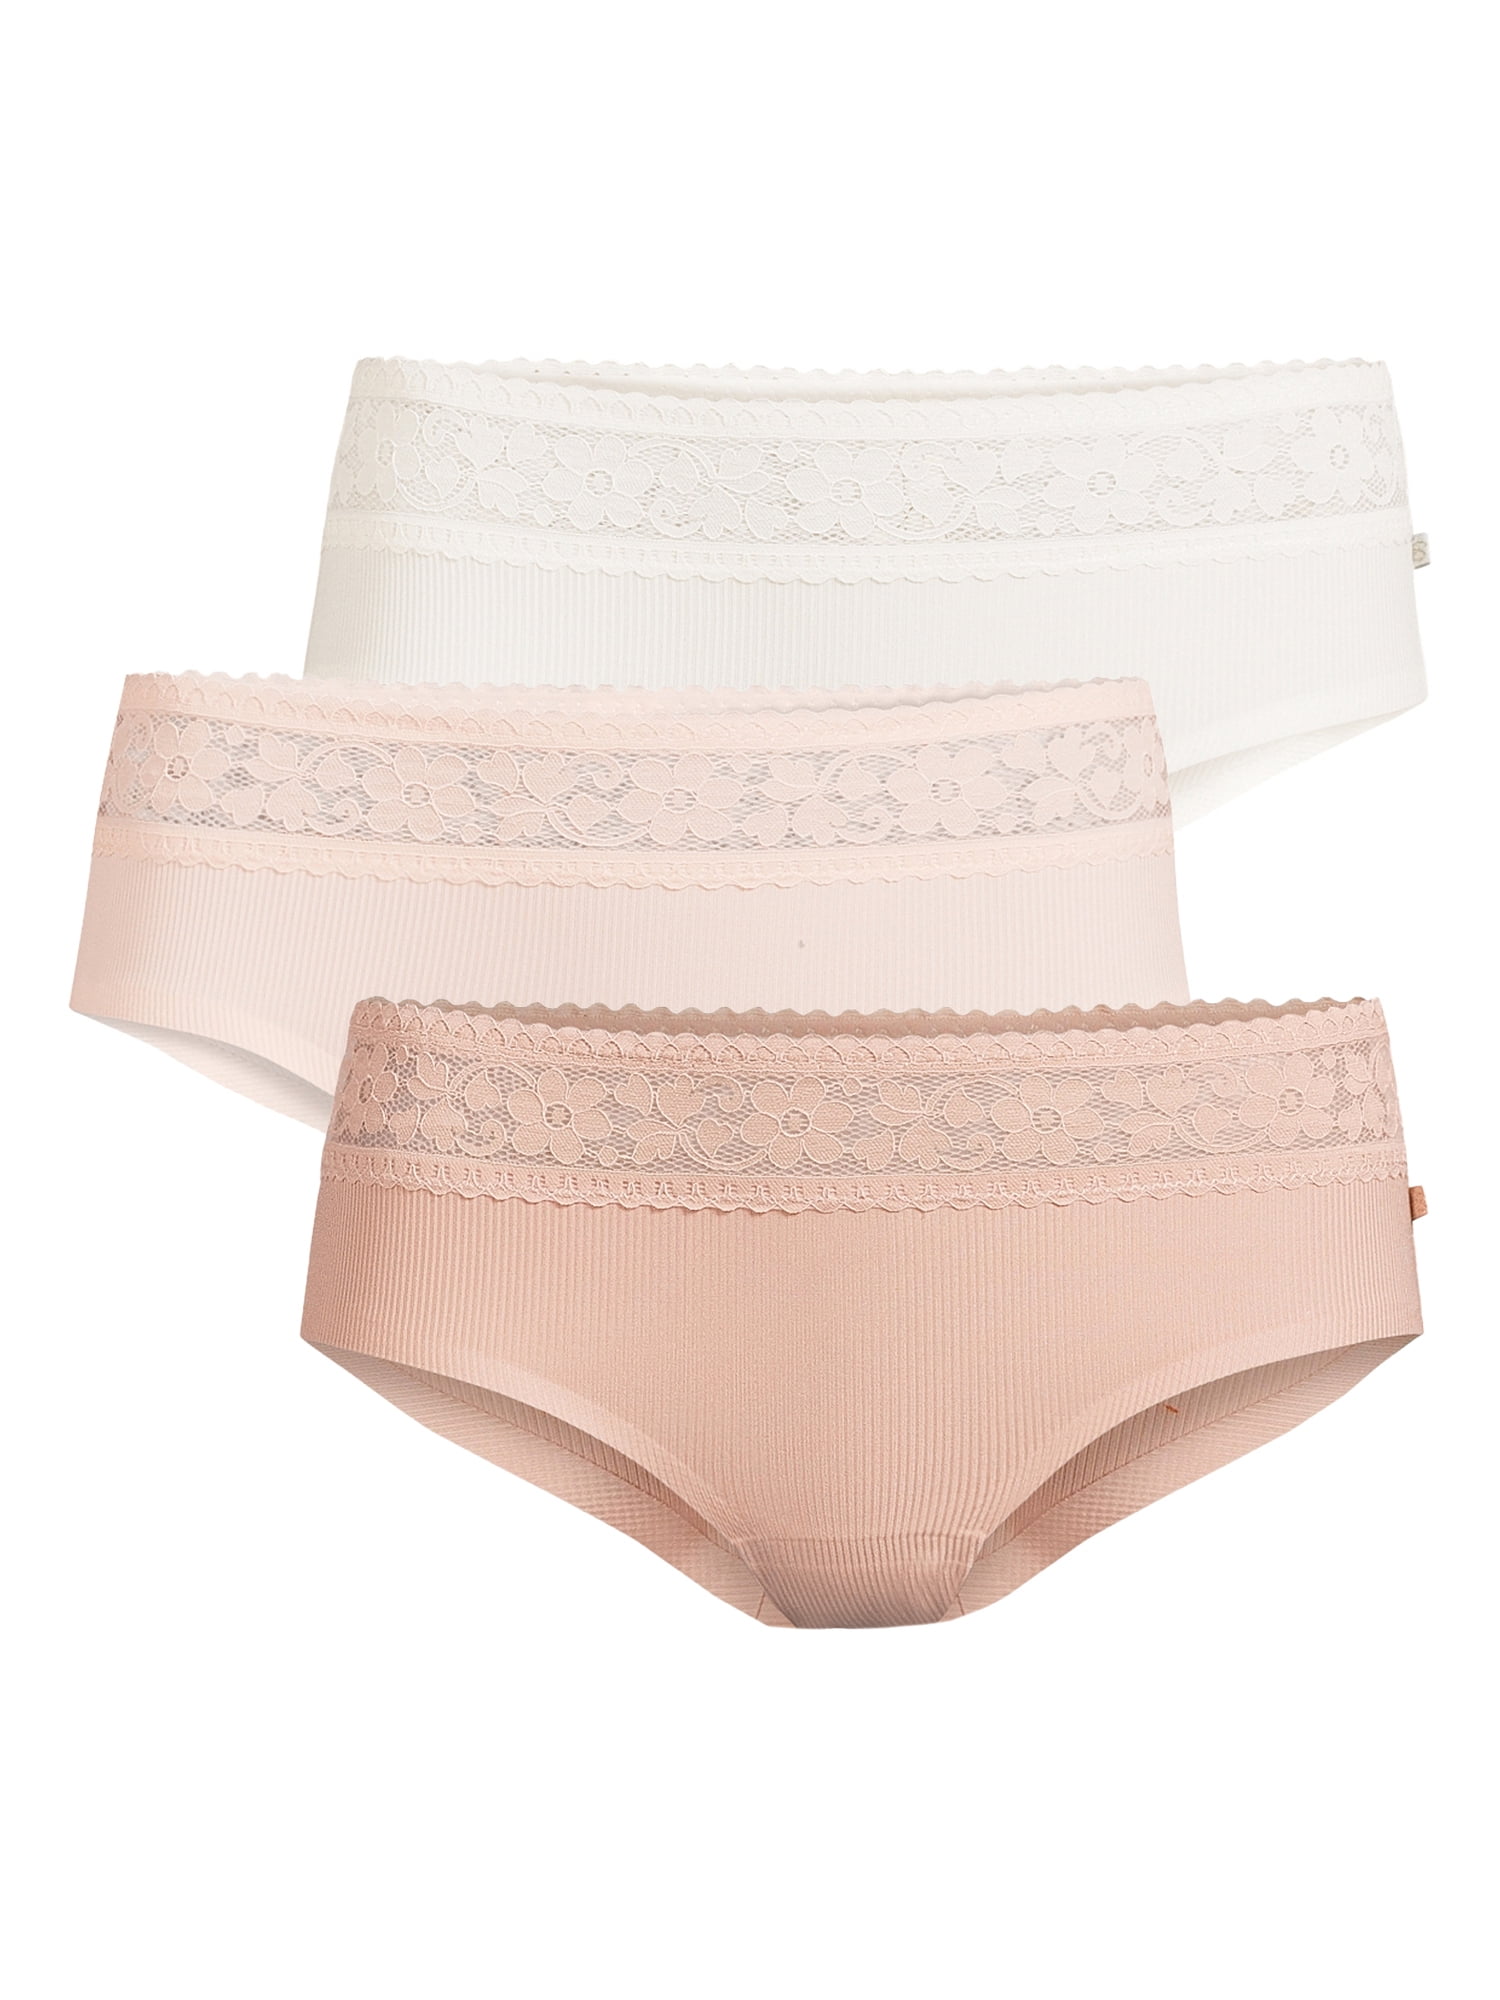 Jessica Simpson Women’s Ribbed Micro and Lace Hipster Panties, 3-Pack